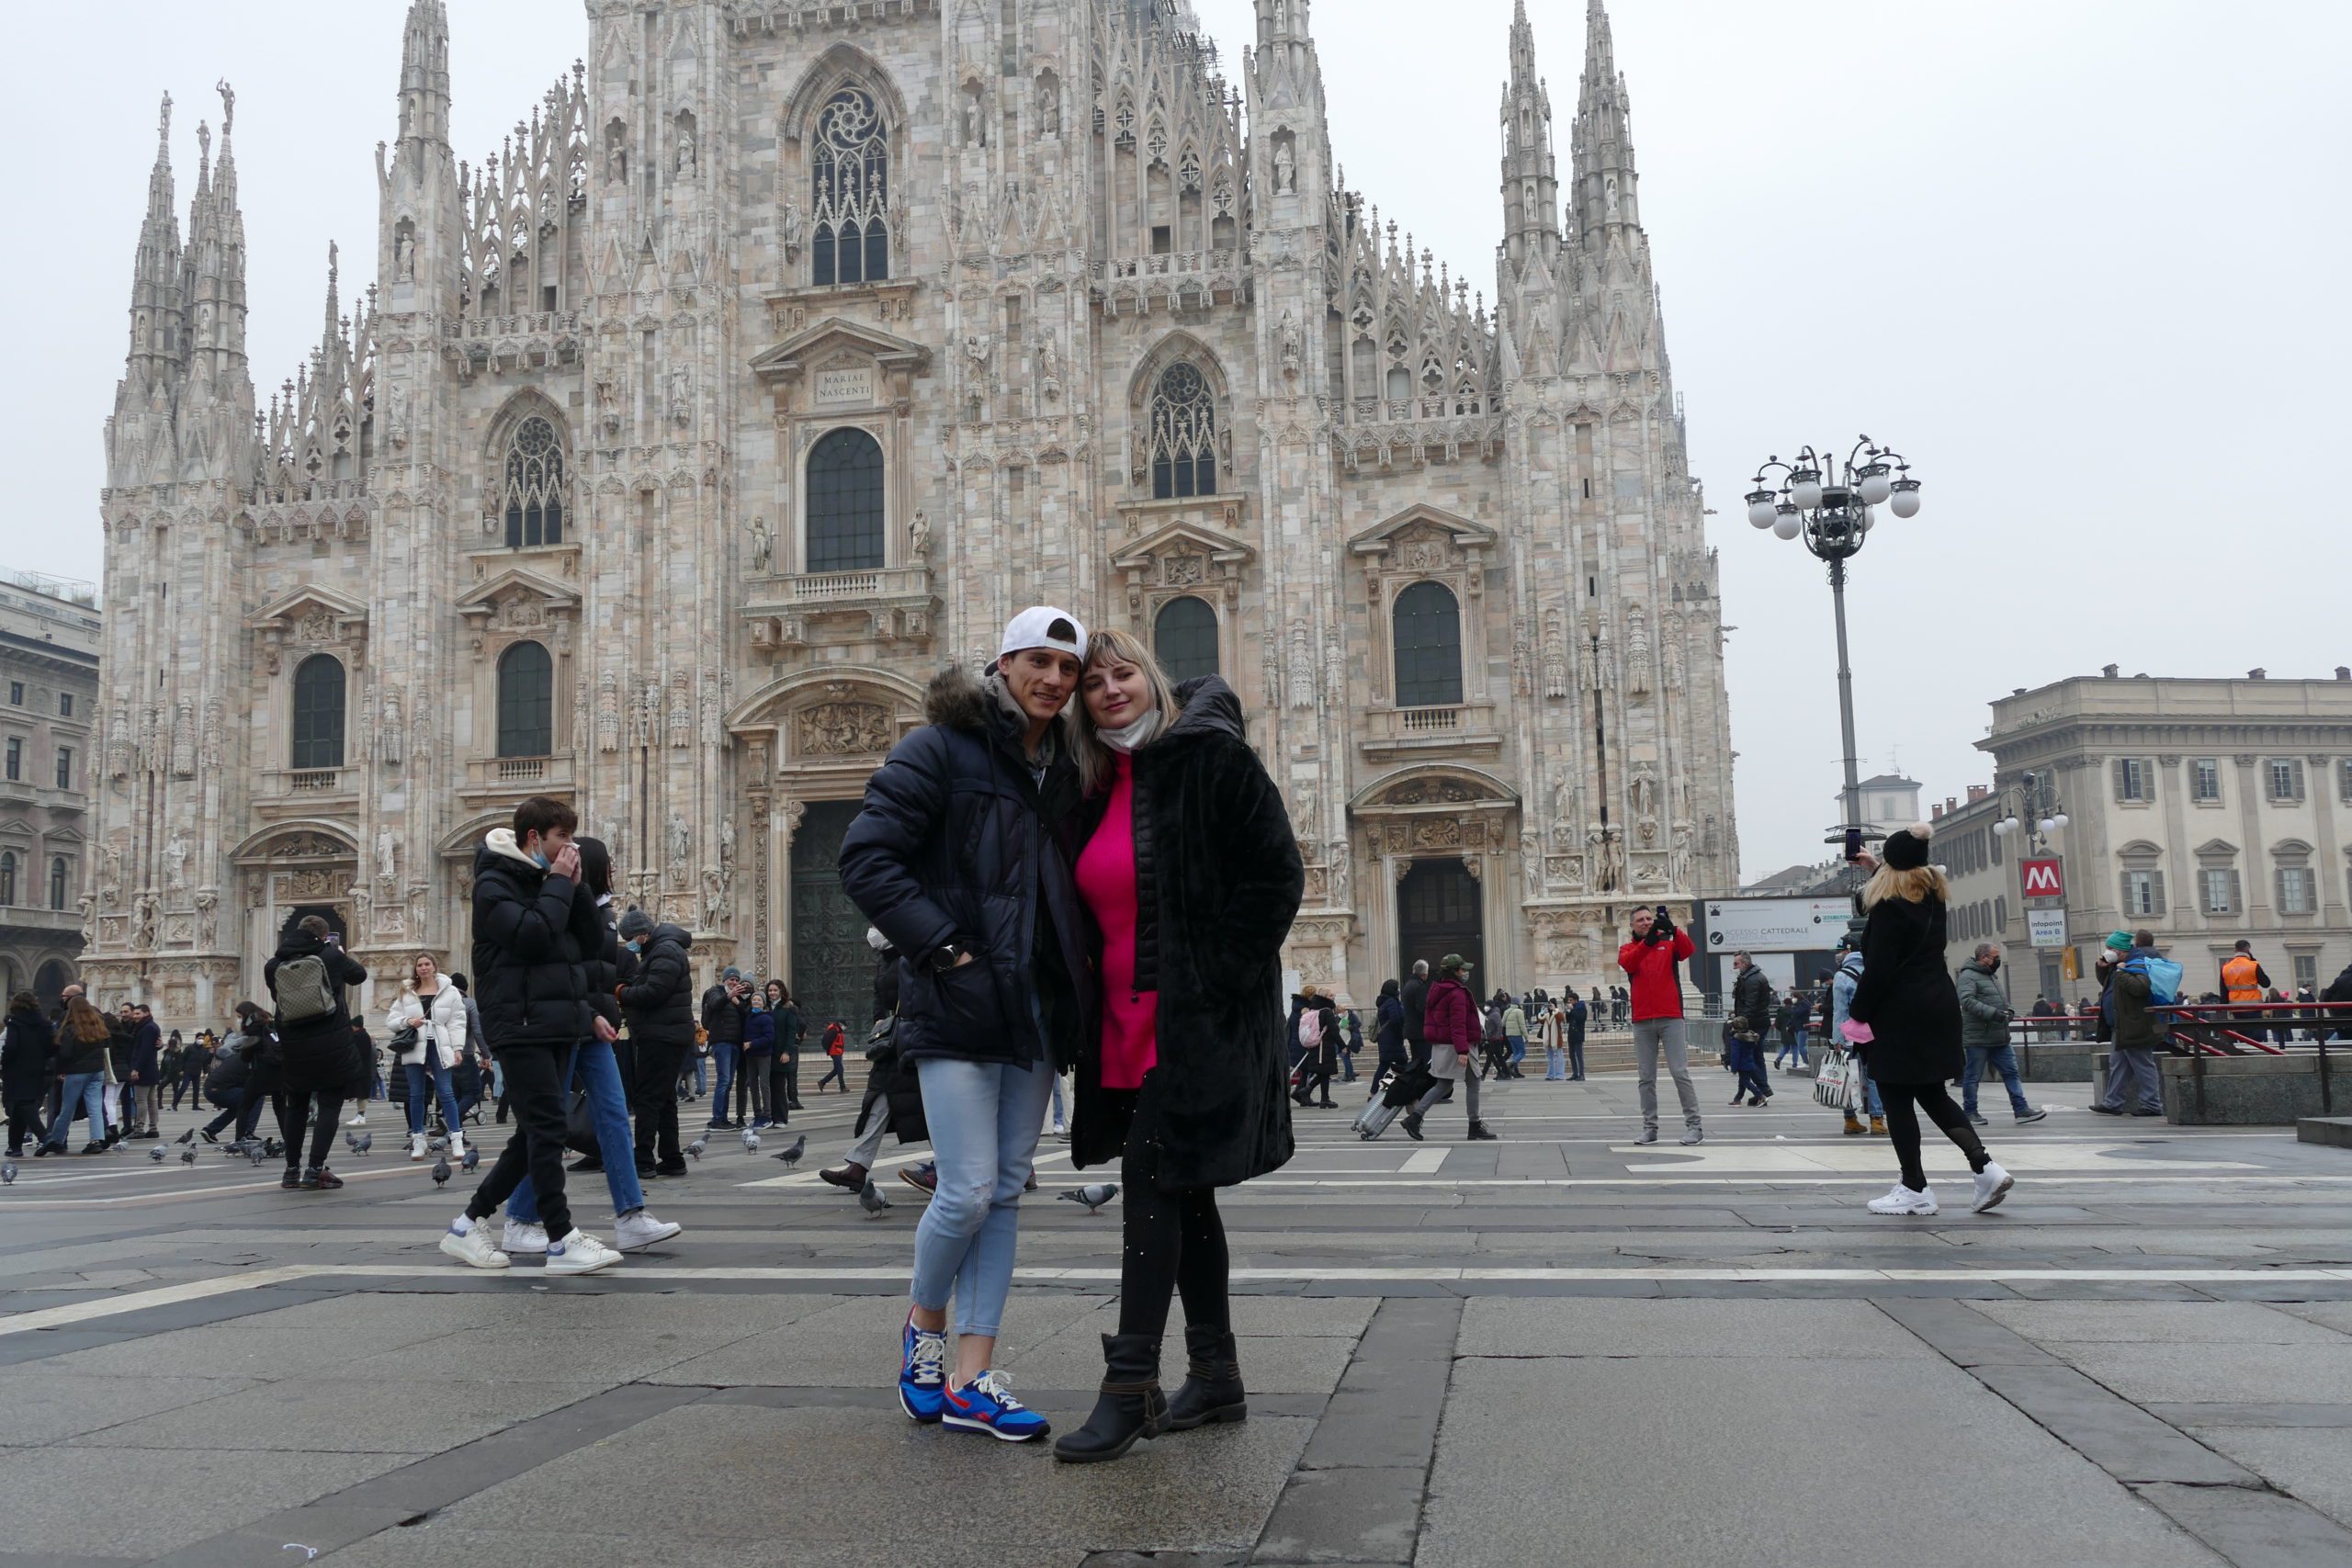 Milan Cathedral Italy